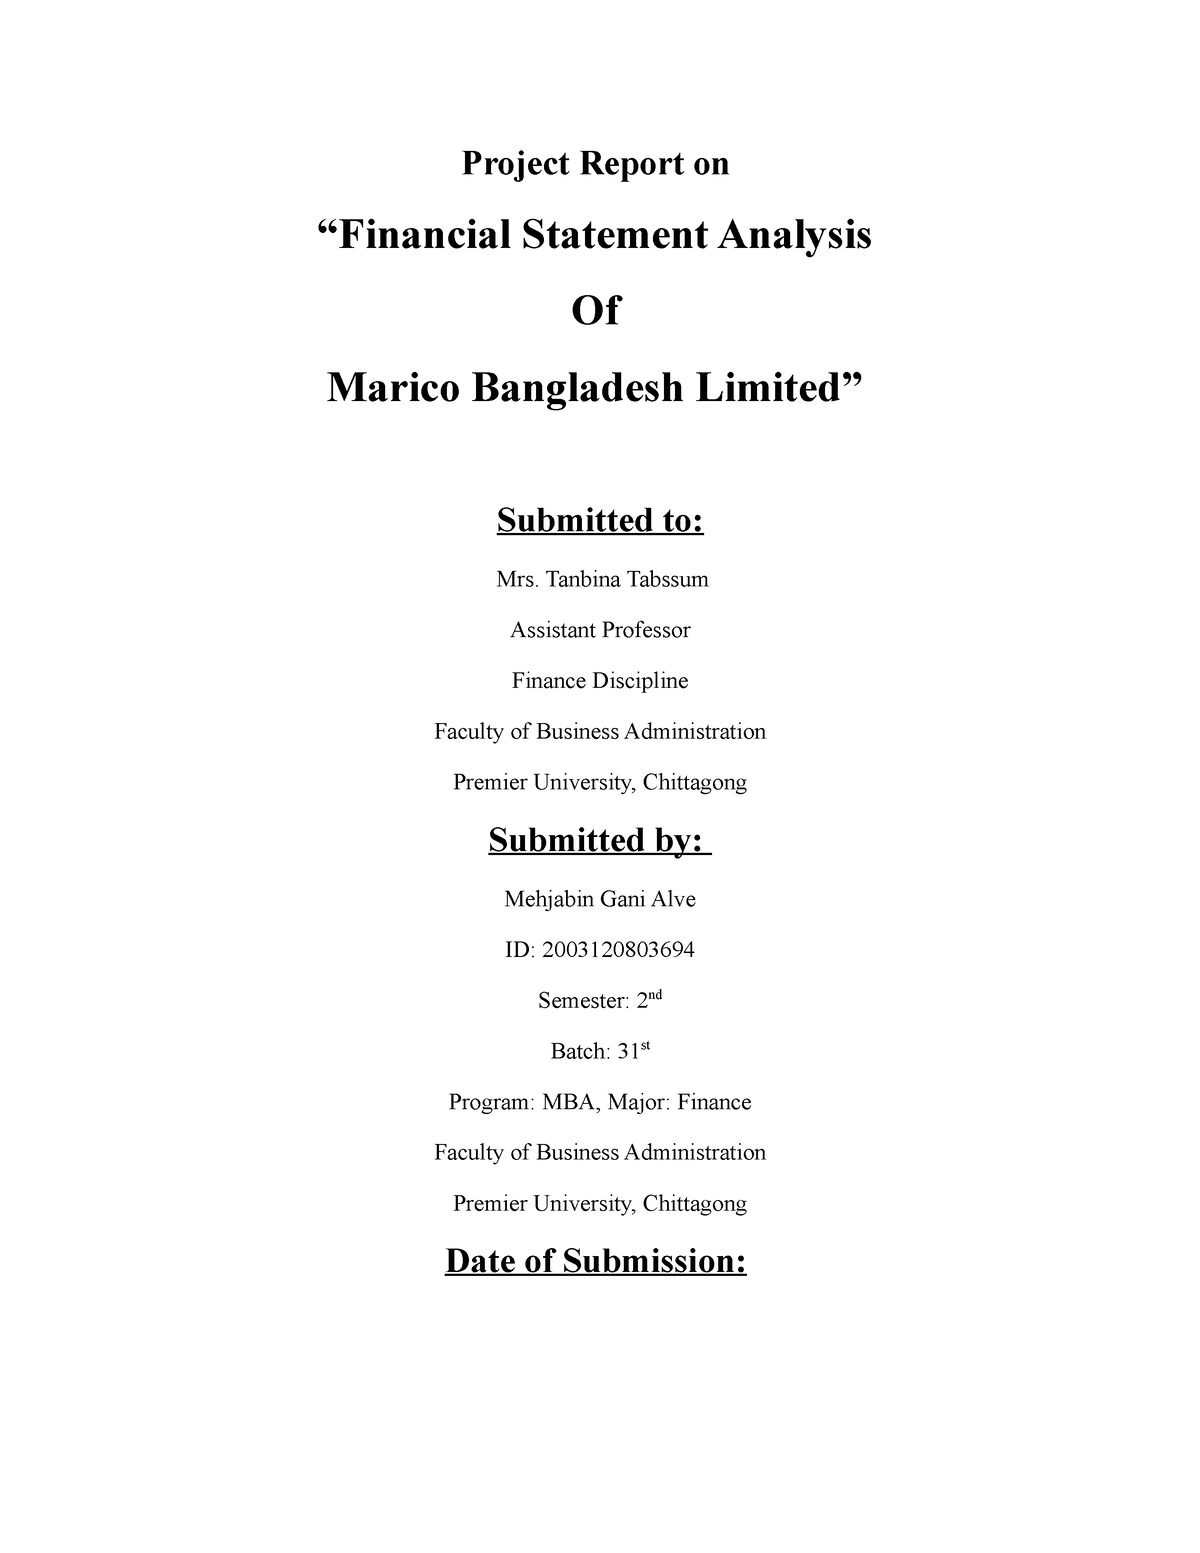 project report on marico bangladesh limited - Project Report on ...